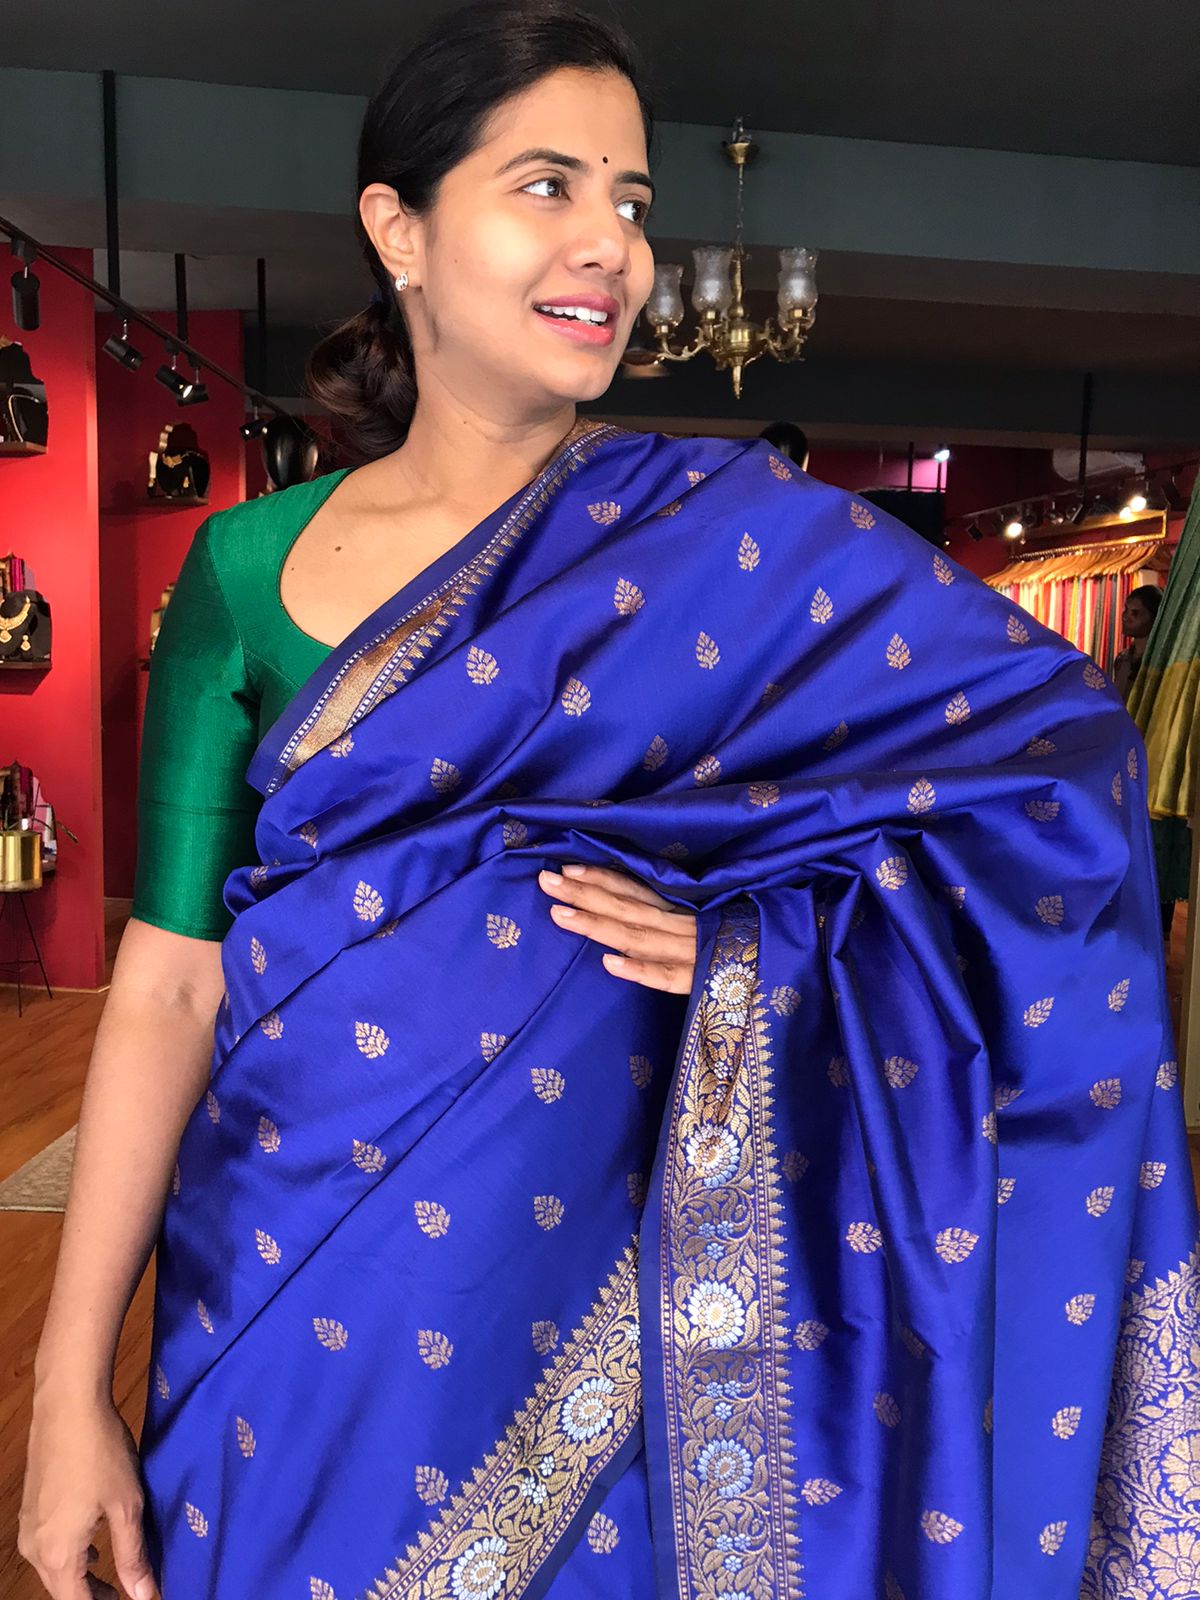 Amazing Royal Blue Saree with Contrast/Combination Blouse Design - YouTube